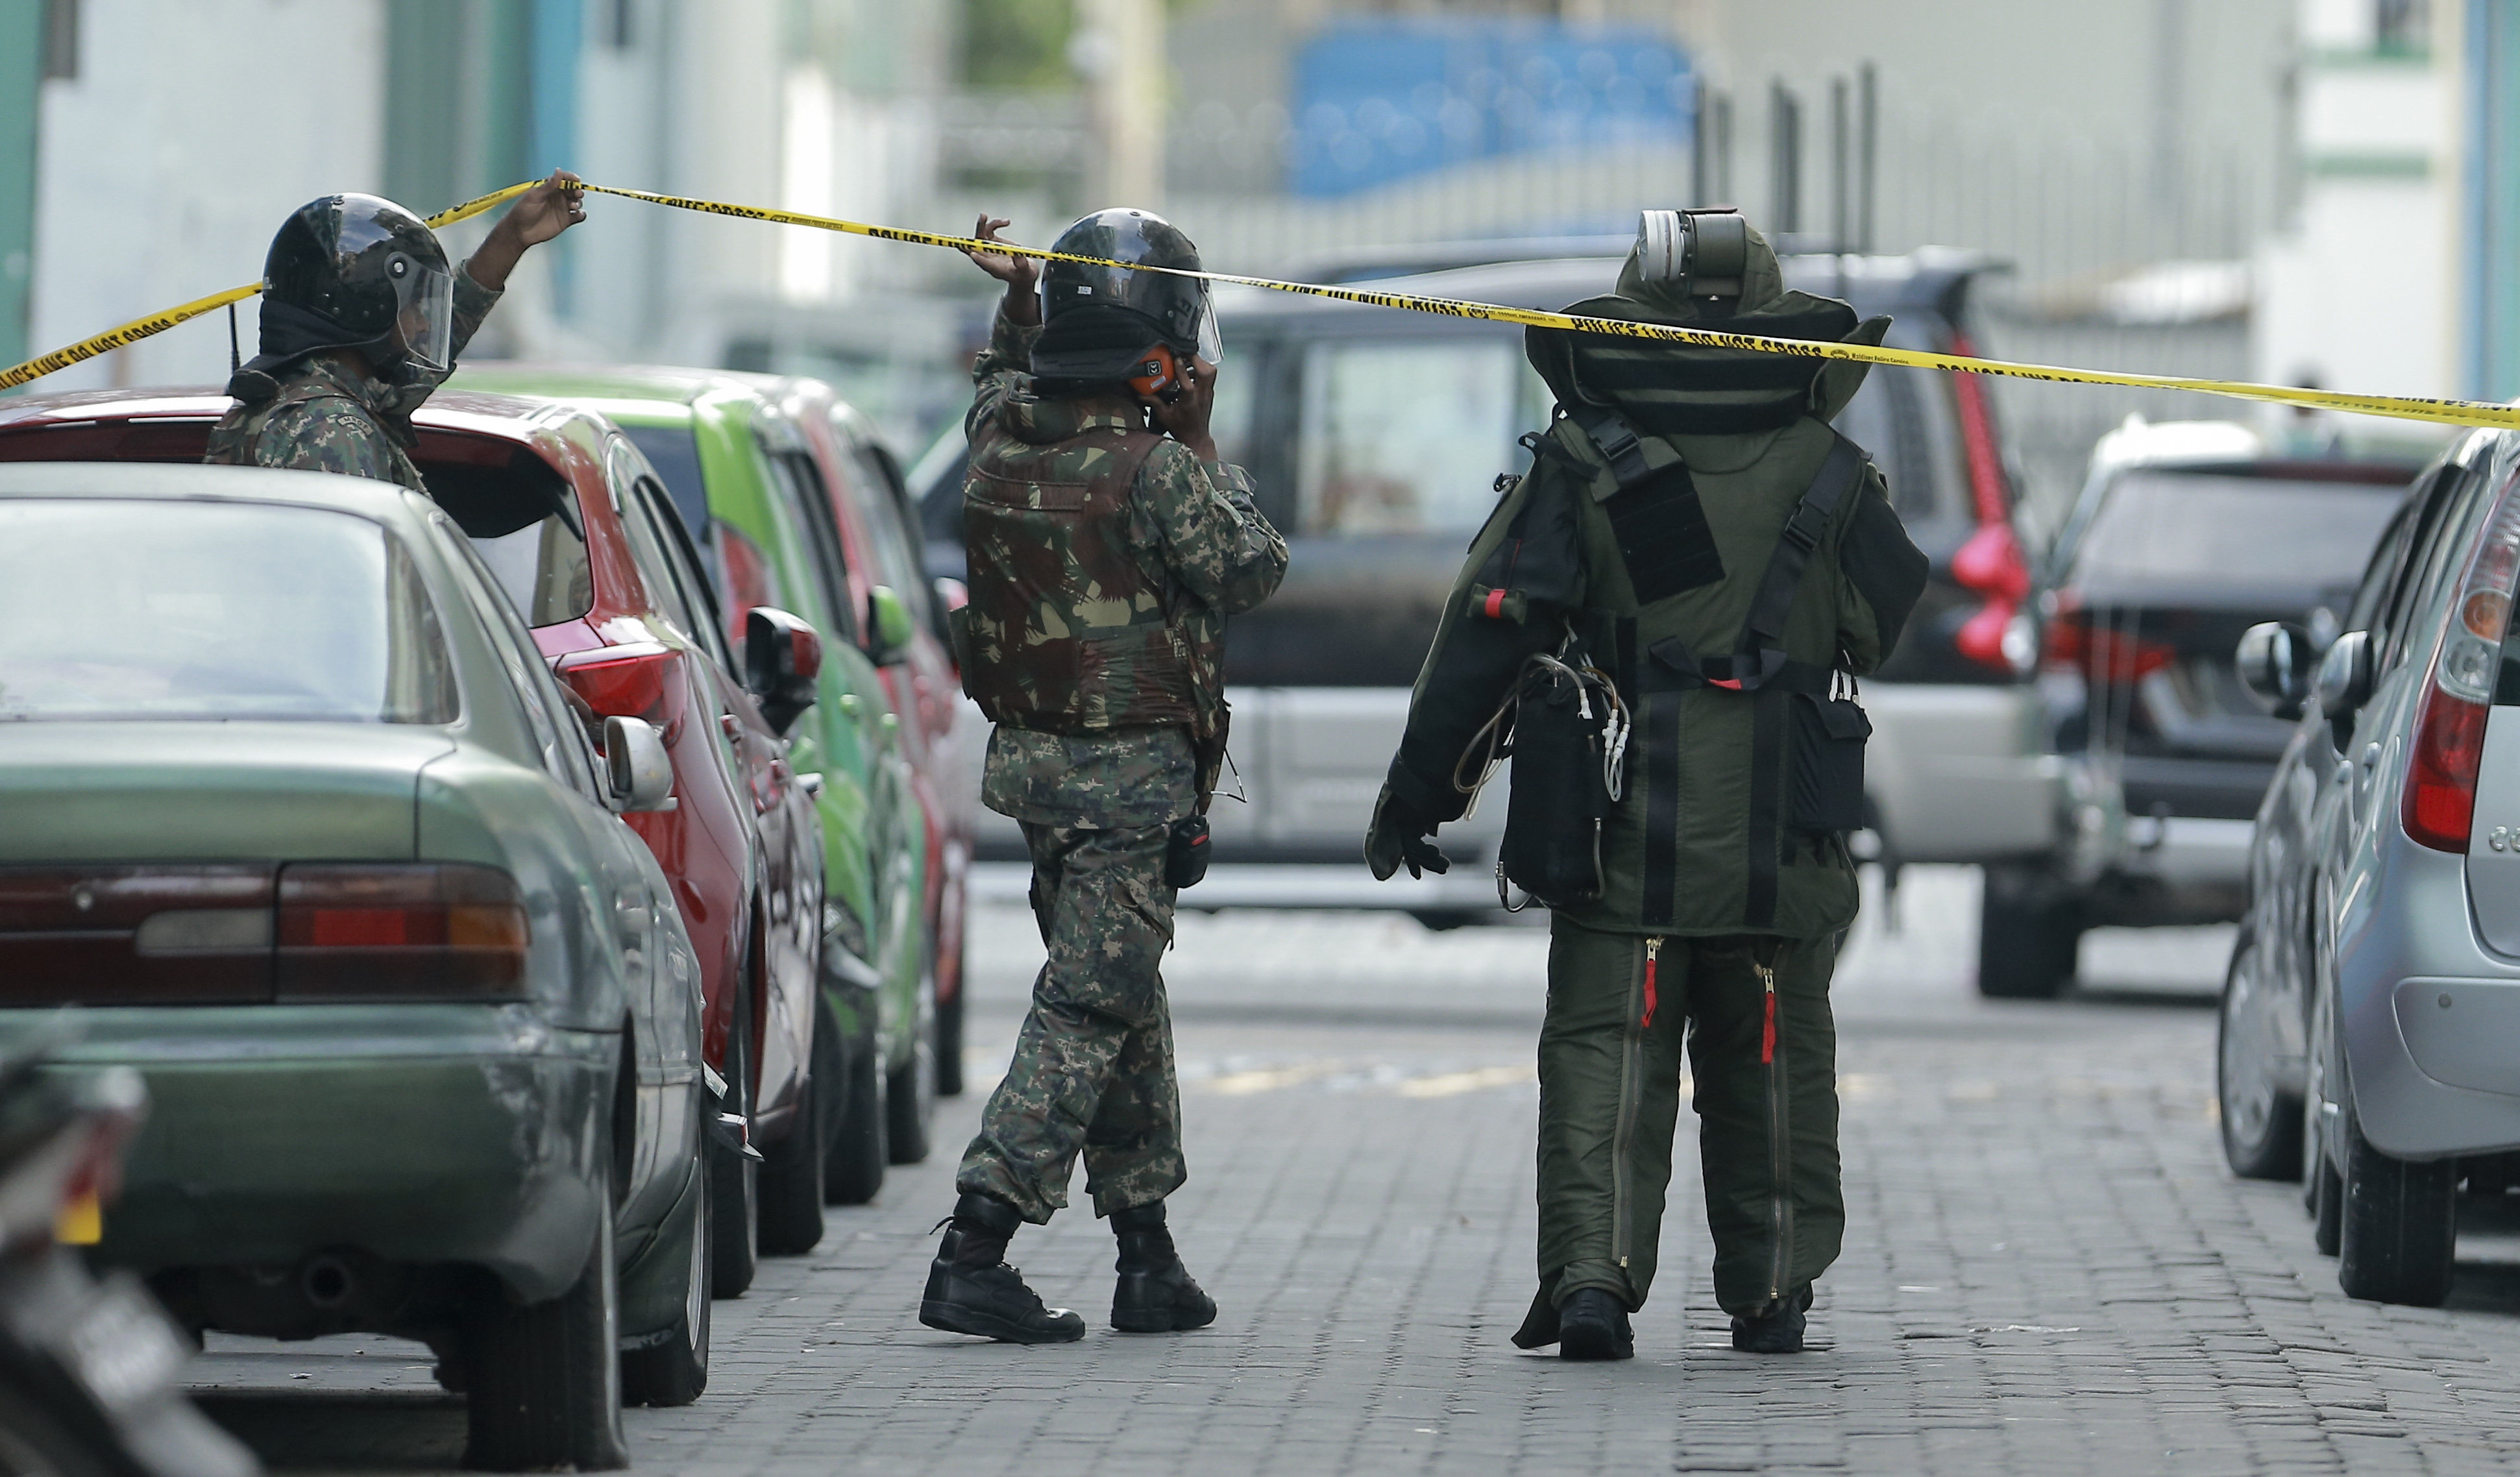 Police and Maldives National Defence Force personnel cordon off an area suspecting an explosive inside the engine compartment of a parked broken car in Male, Maldives on Wednesday. It was later confirmed to be a hoax. Photo: AP 